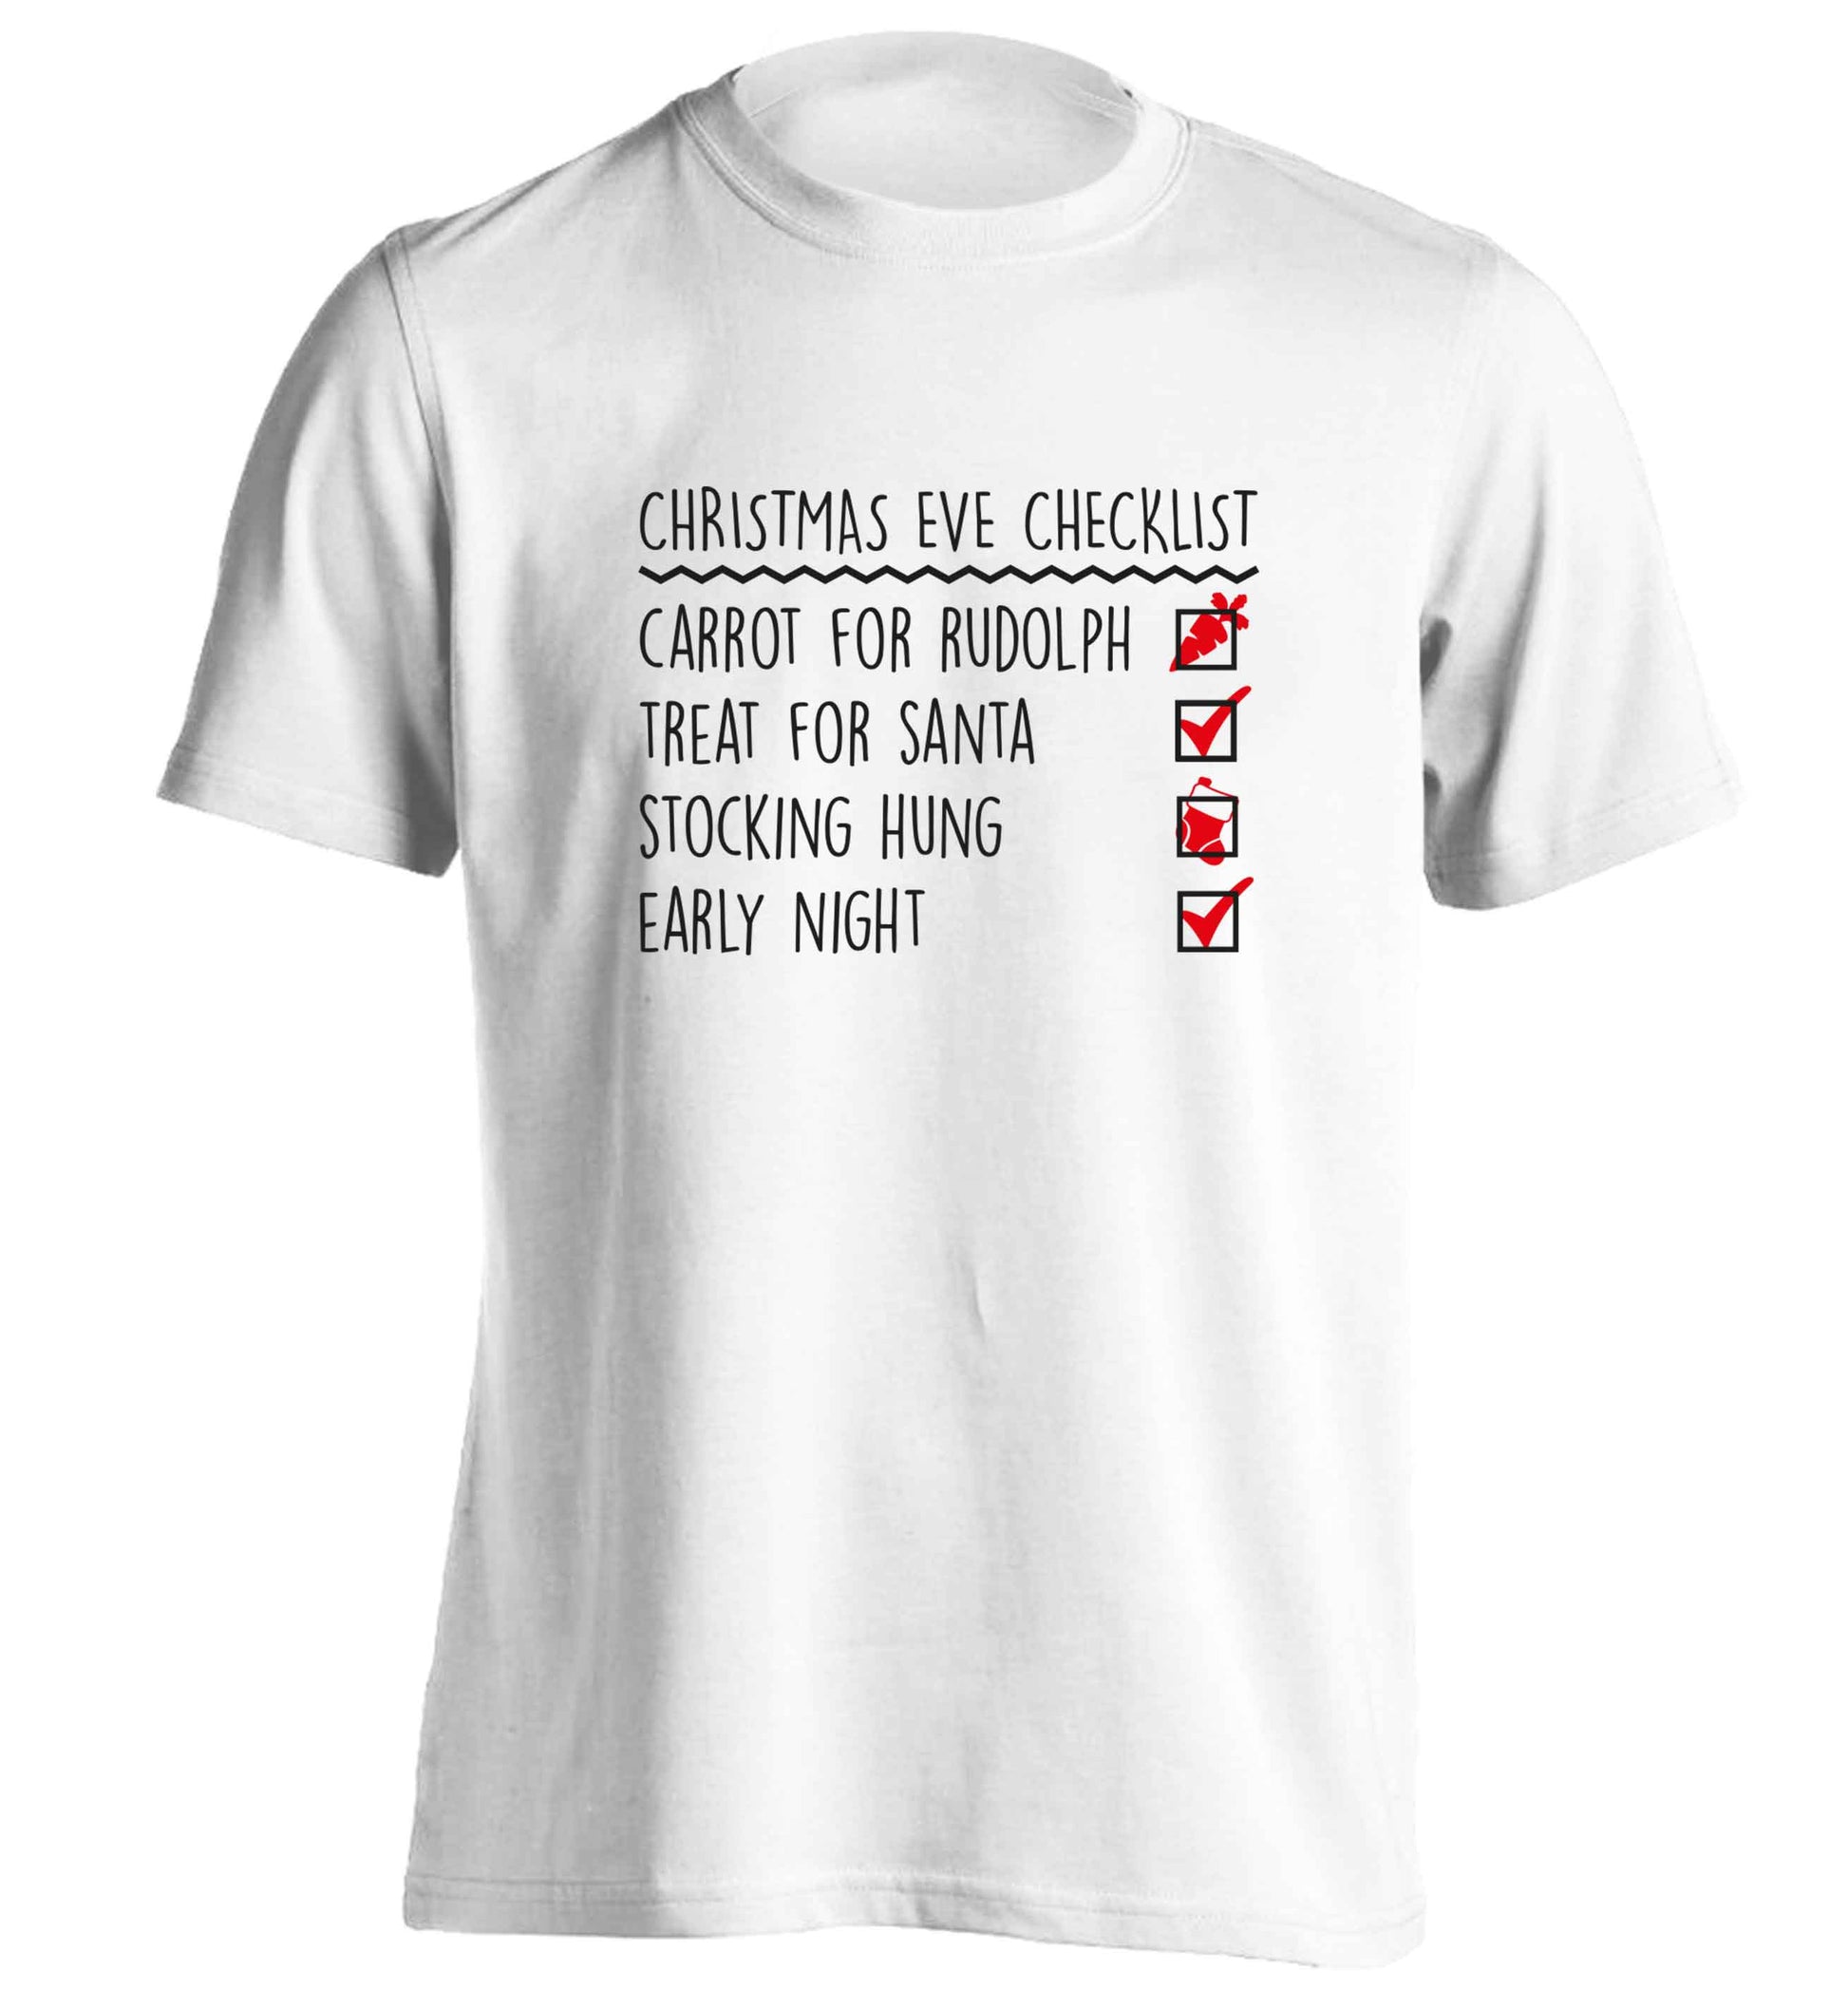 Candy Canes Candy Corns adults unisex white Tshirt 2XL